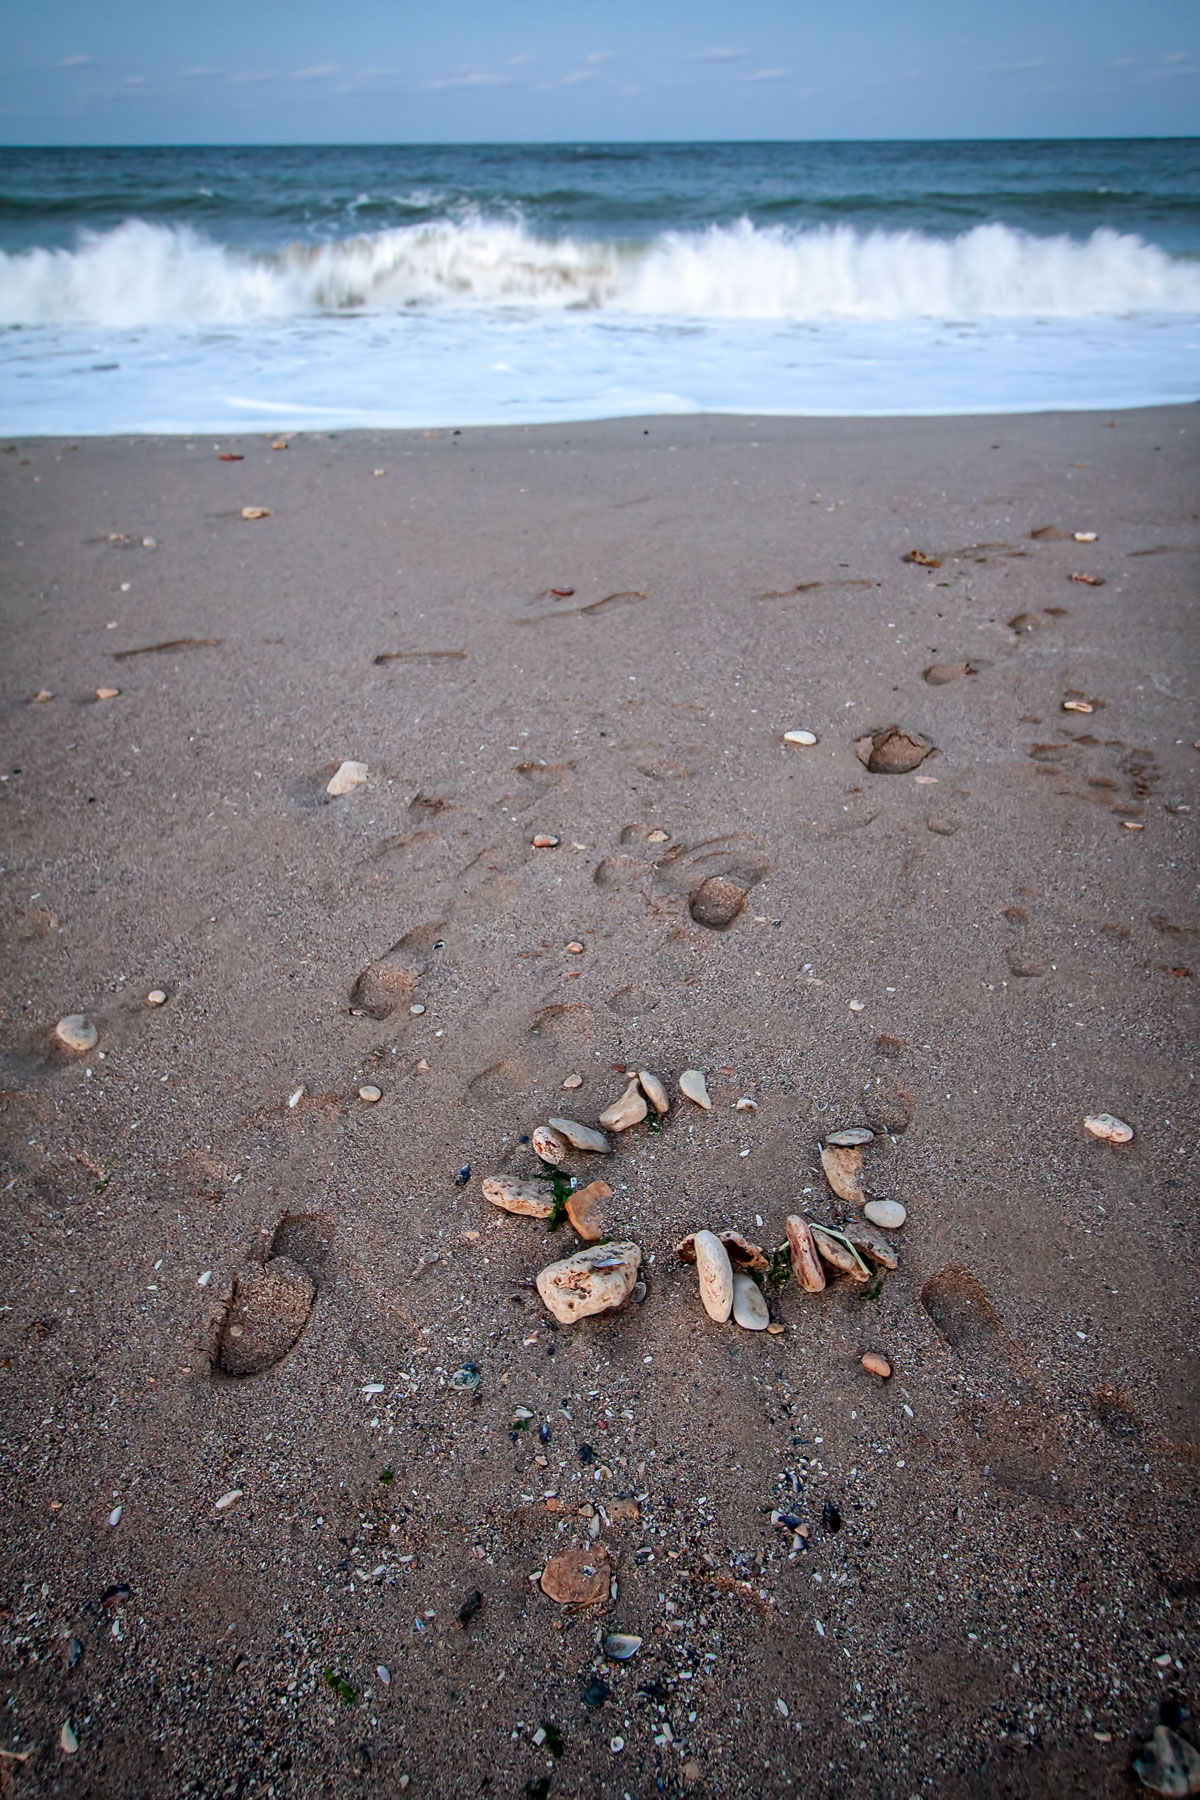 Footprints on a deserted beach in early autumn